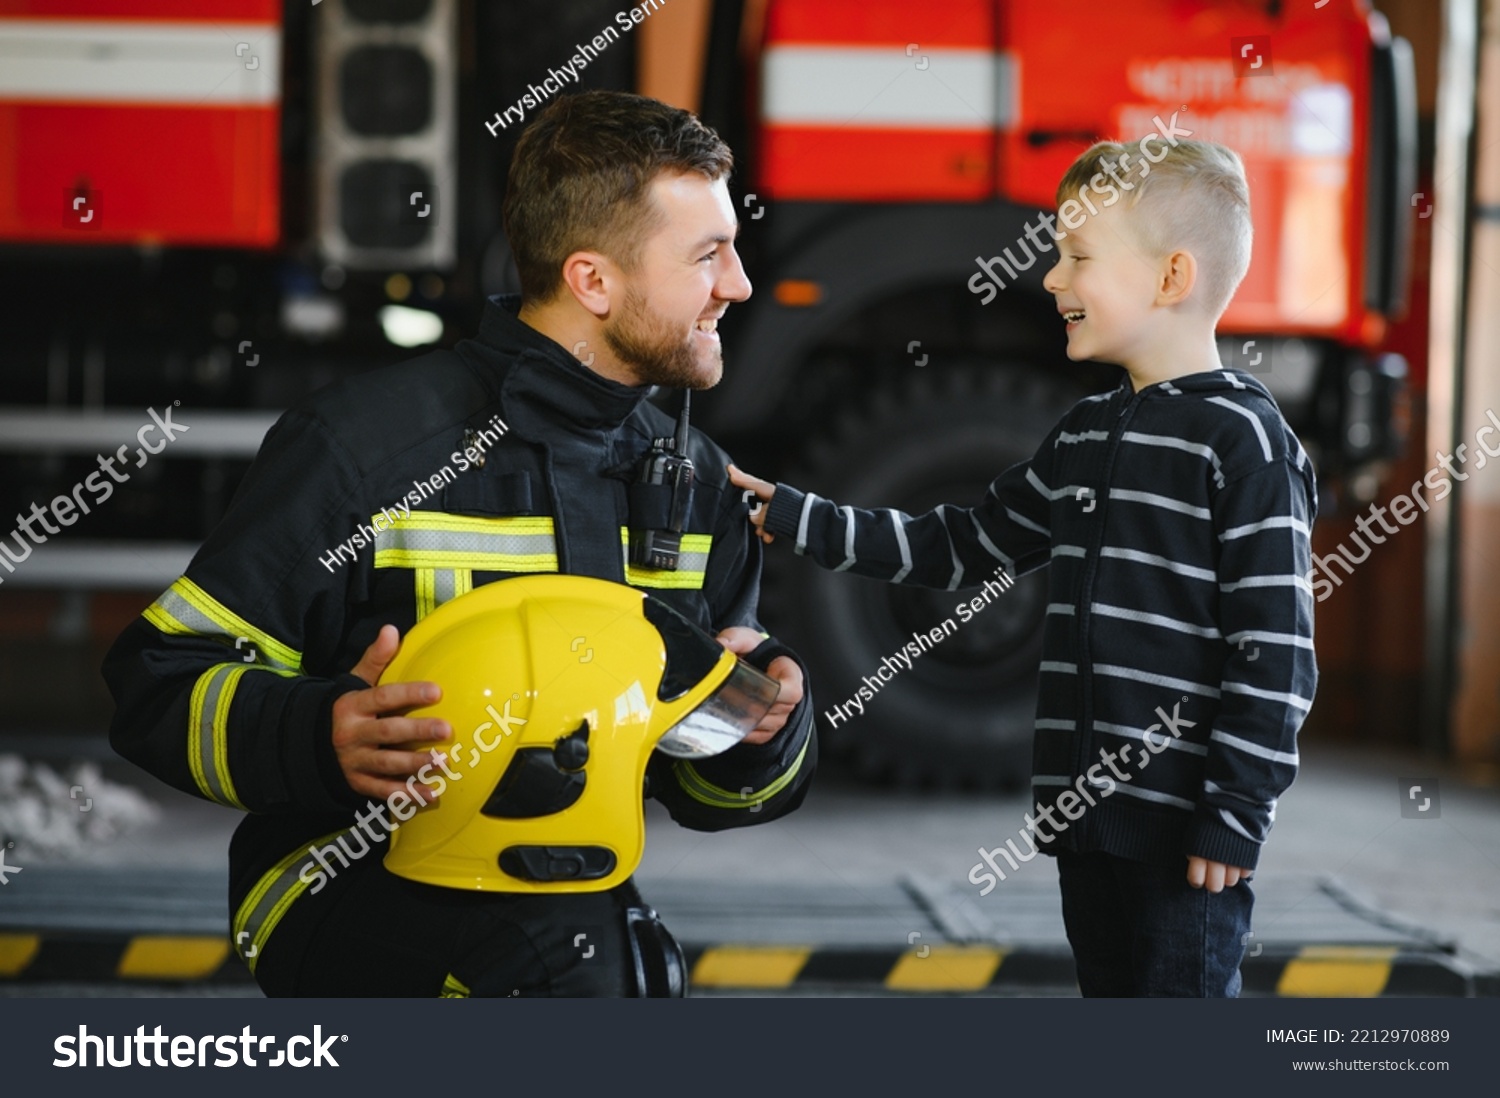 A firefighter take a little child boy to save him. Fire engine car on background. Fireman with kid in his arms. Protection concept #2212970889